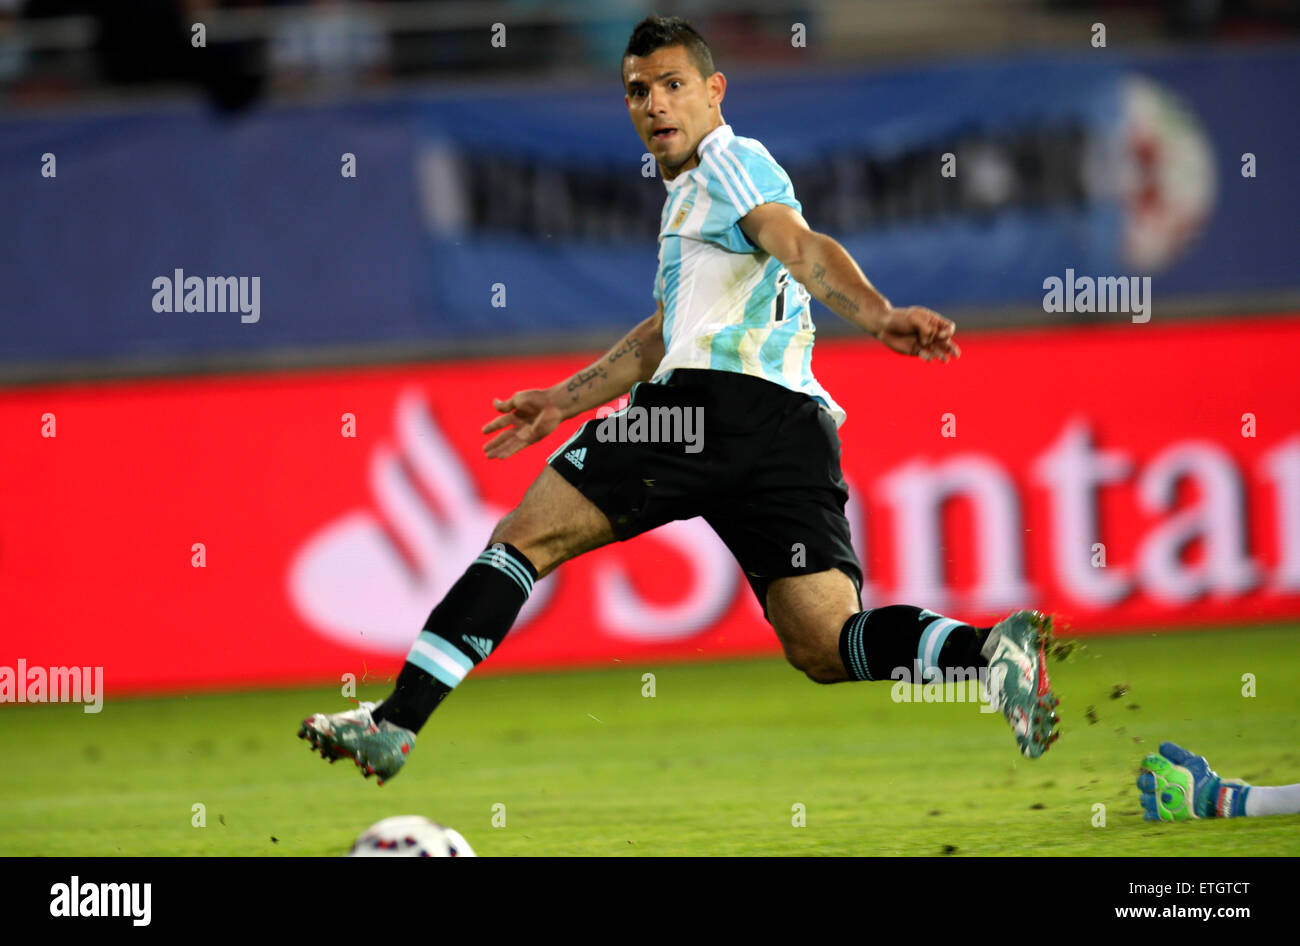 La Serena, Chile. 13th June, 2015. Argentina's Sergio Aguero controls the ball during a Group B match between Argentina and Paraguay at Copa America 2015, in La Serena, Chile, on June 13, 2015. The match ended with a 2-2 draw. Credit:  Juan Roleri/TELAM/Xinhua/Alamy Live News Stock Photo